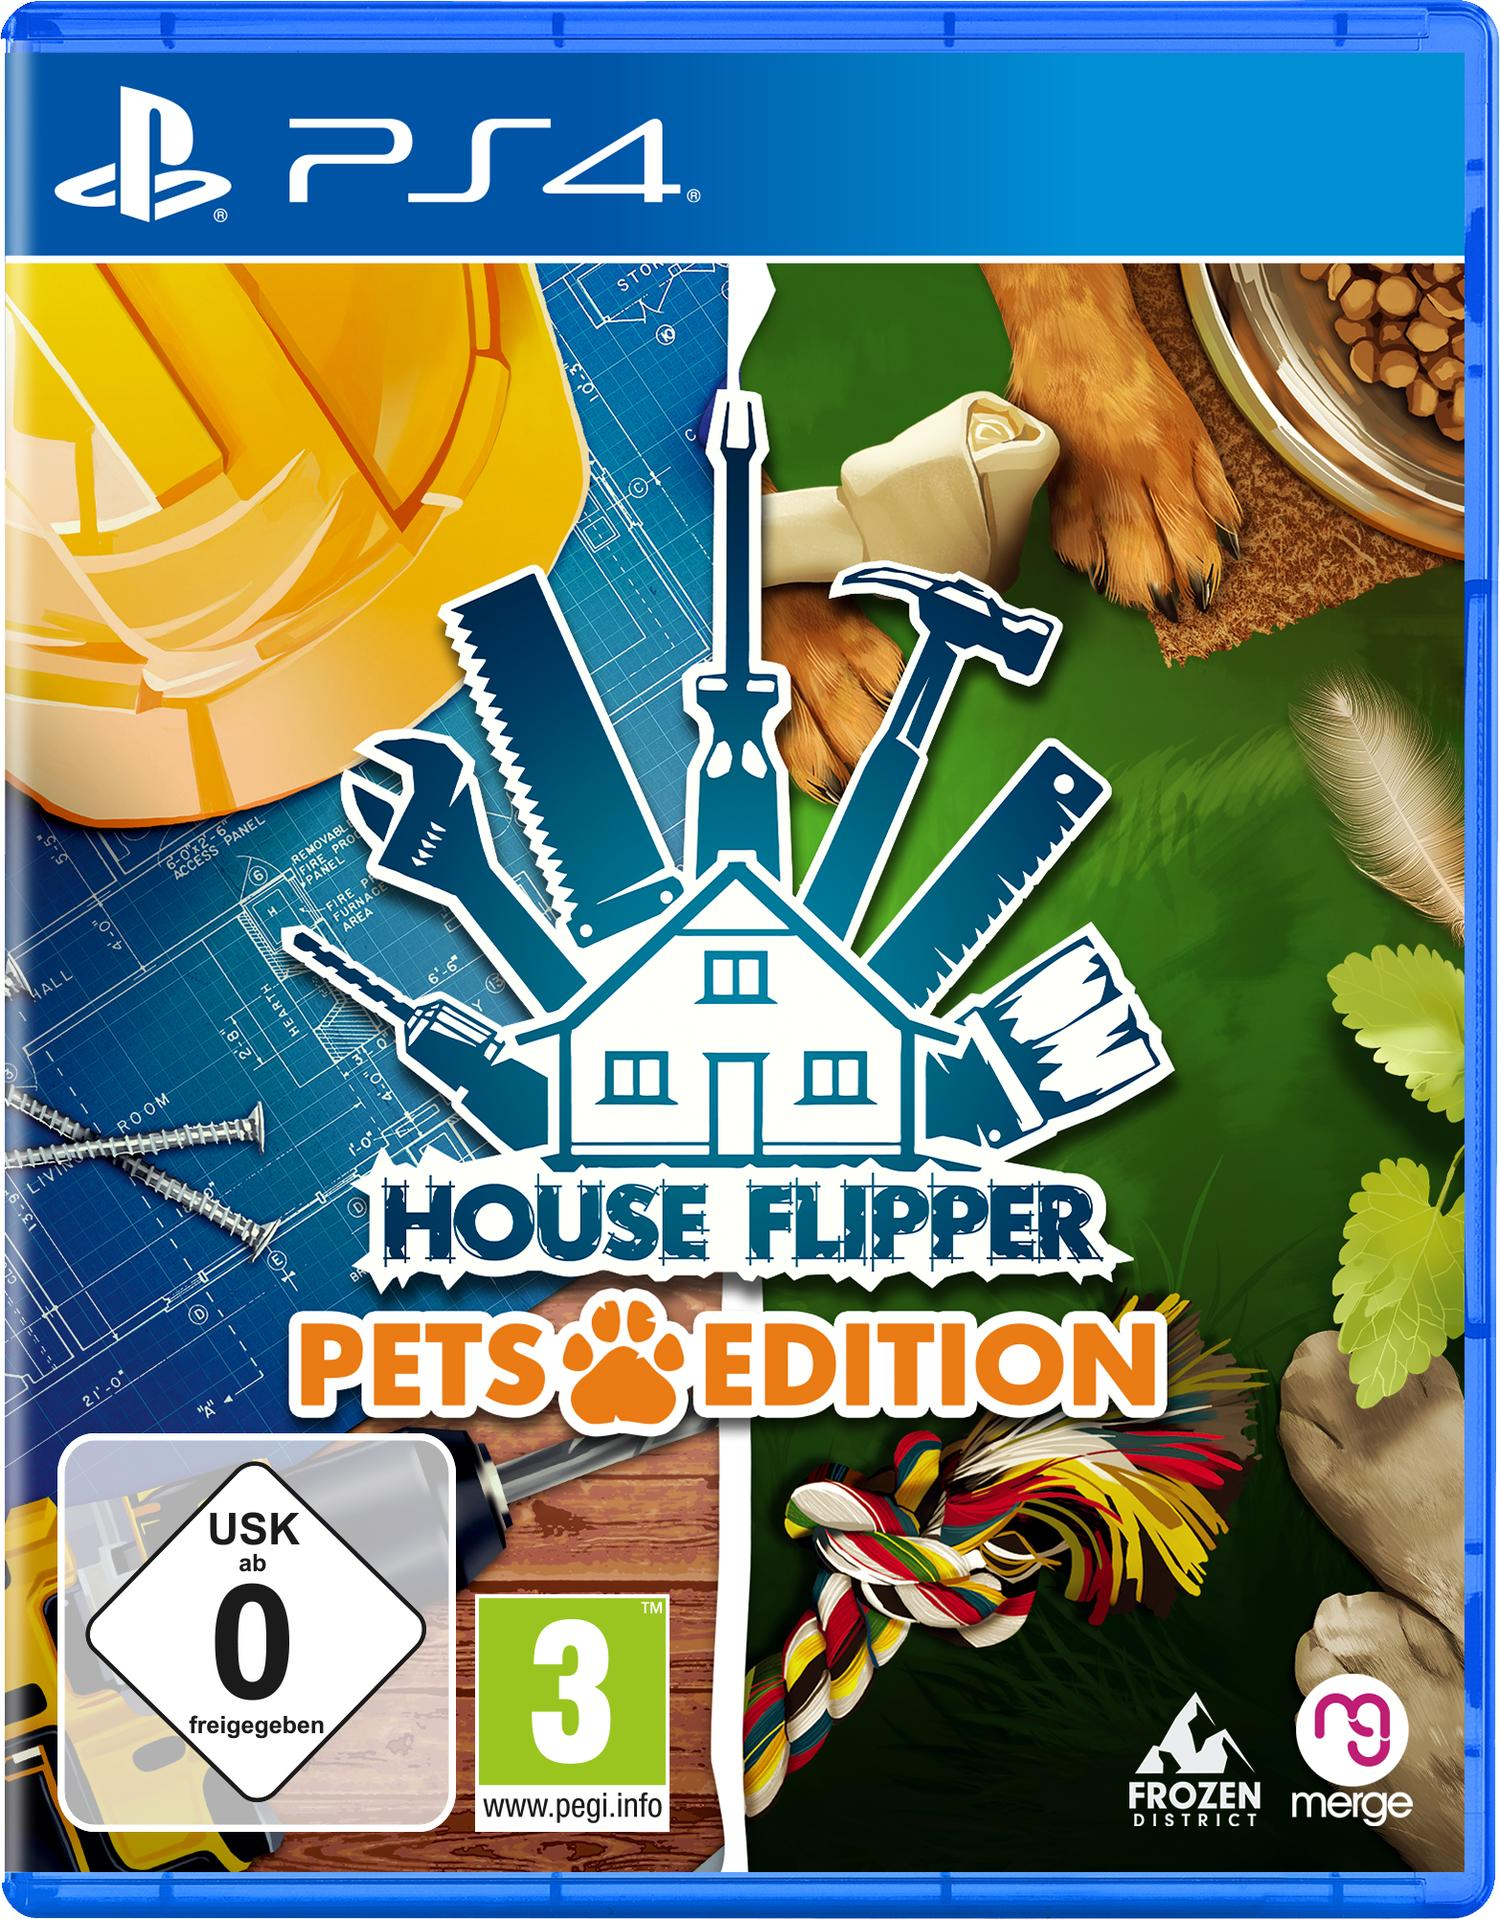 House Flipper Edition Pets 4] [PlayStation - 